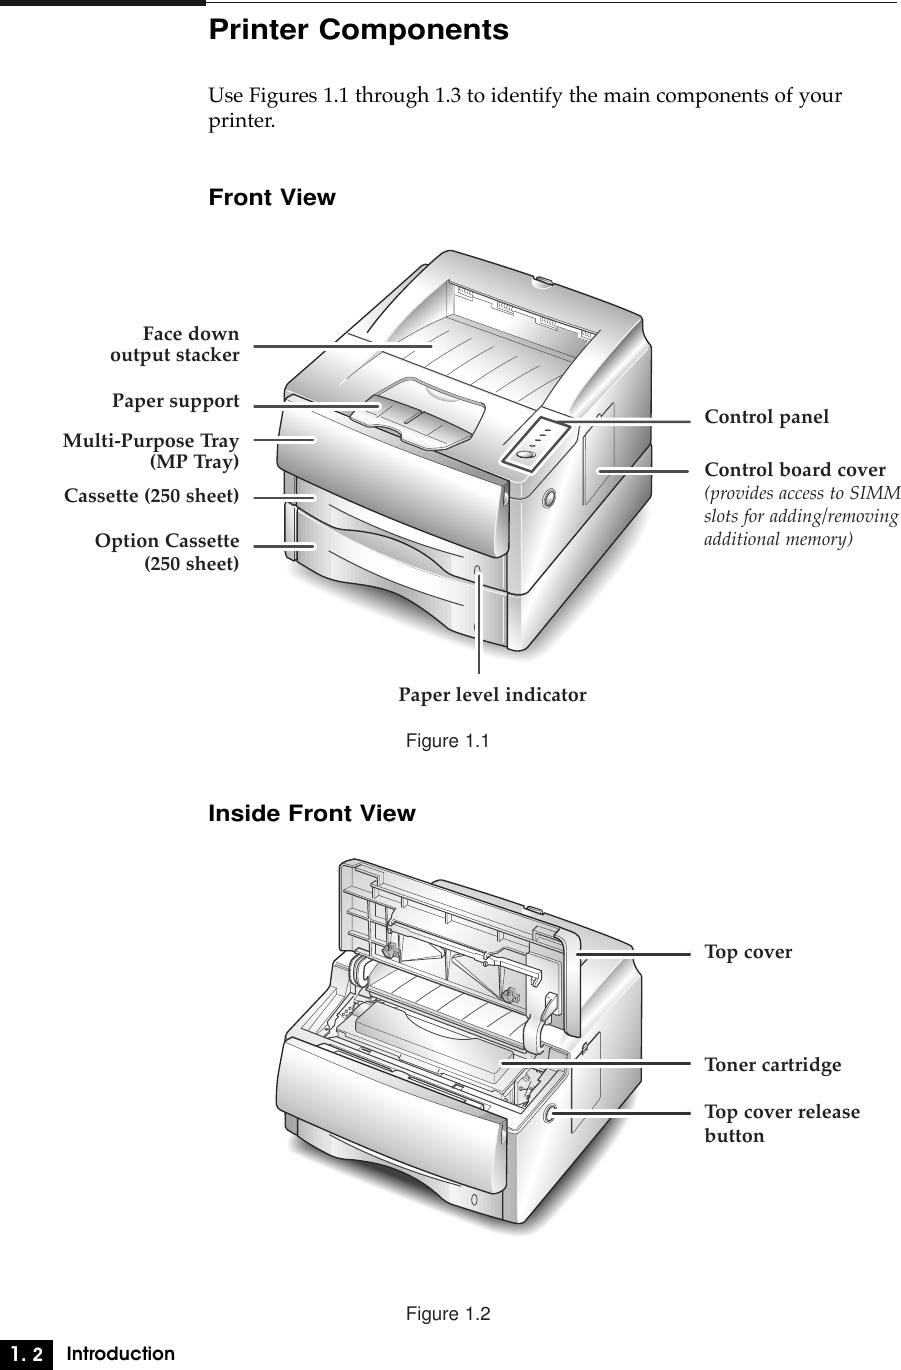 1. 2IntroductionPrinter ComponentsUse Figures 1.1 through 1.3 to identify the main components of yourprinter.Front ViewInside Front ViewFace down output stackerPaper supportCassette (250 sheet)Option Cassette (250 sheet)Multi-Purpose Tray (MP Tray)Control panelControl board cover(provides access to SIMM slots for adding/removing additional memory)Top coverToner cartridgeTop cover release buttonPaper level indicatorFigure 1.1Figure 1.2